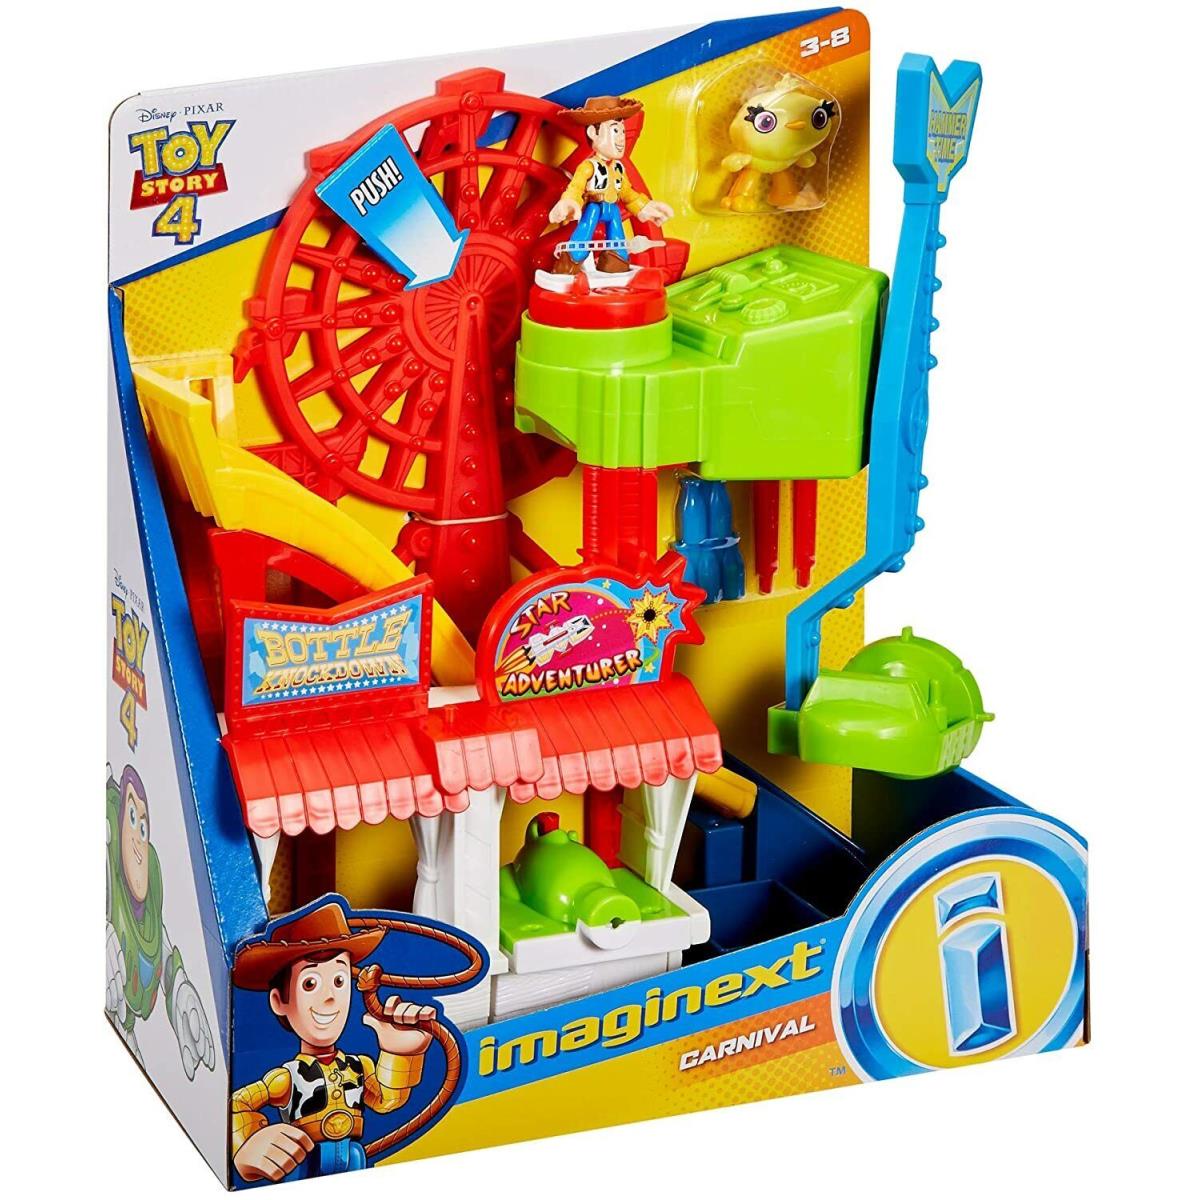 Fisher-price Imaginext Playset Featuring Disney Pix Toy Story Carnival Box